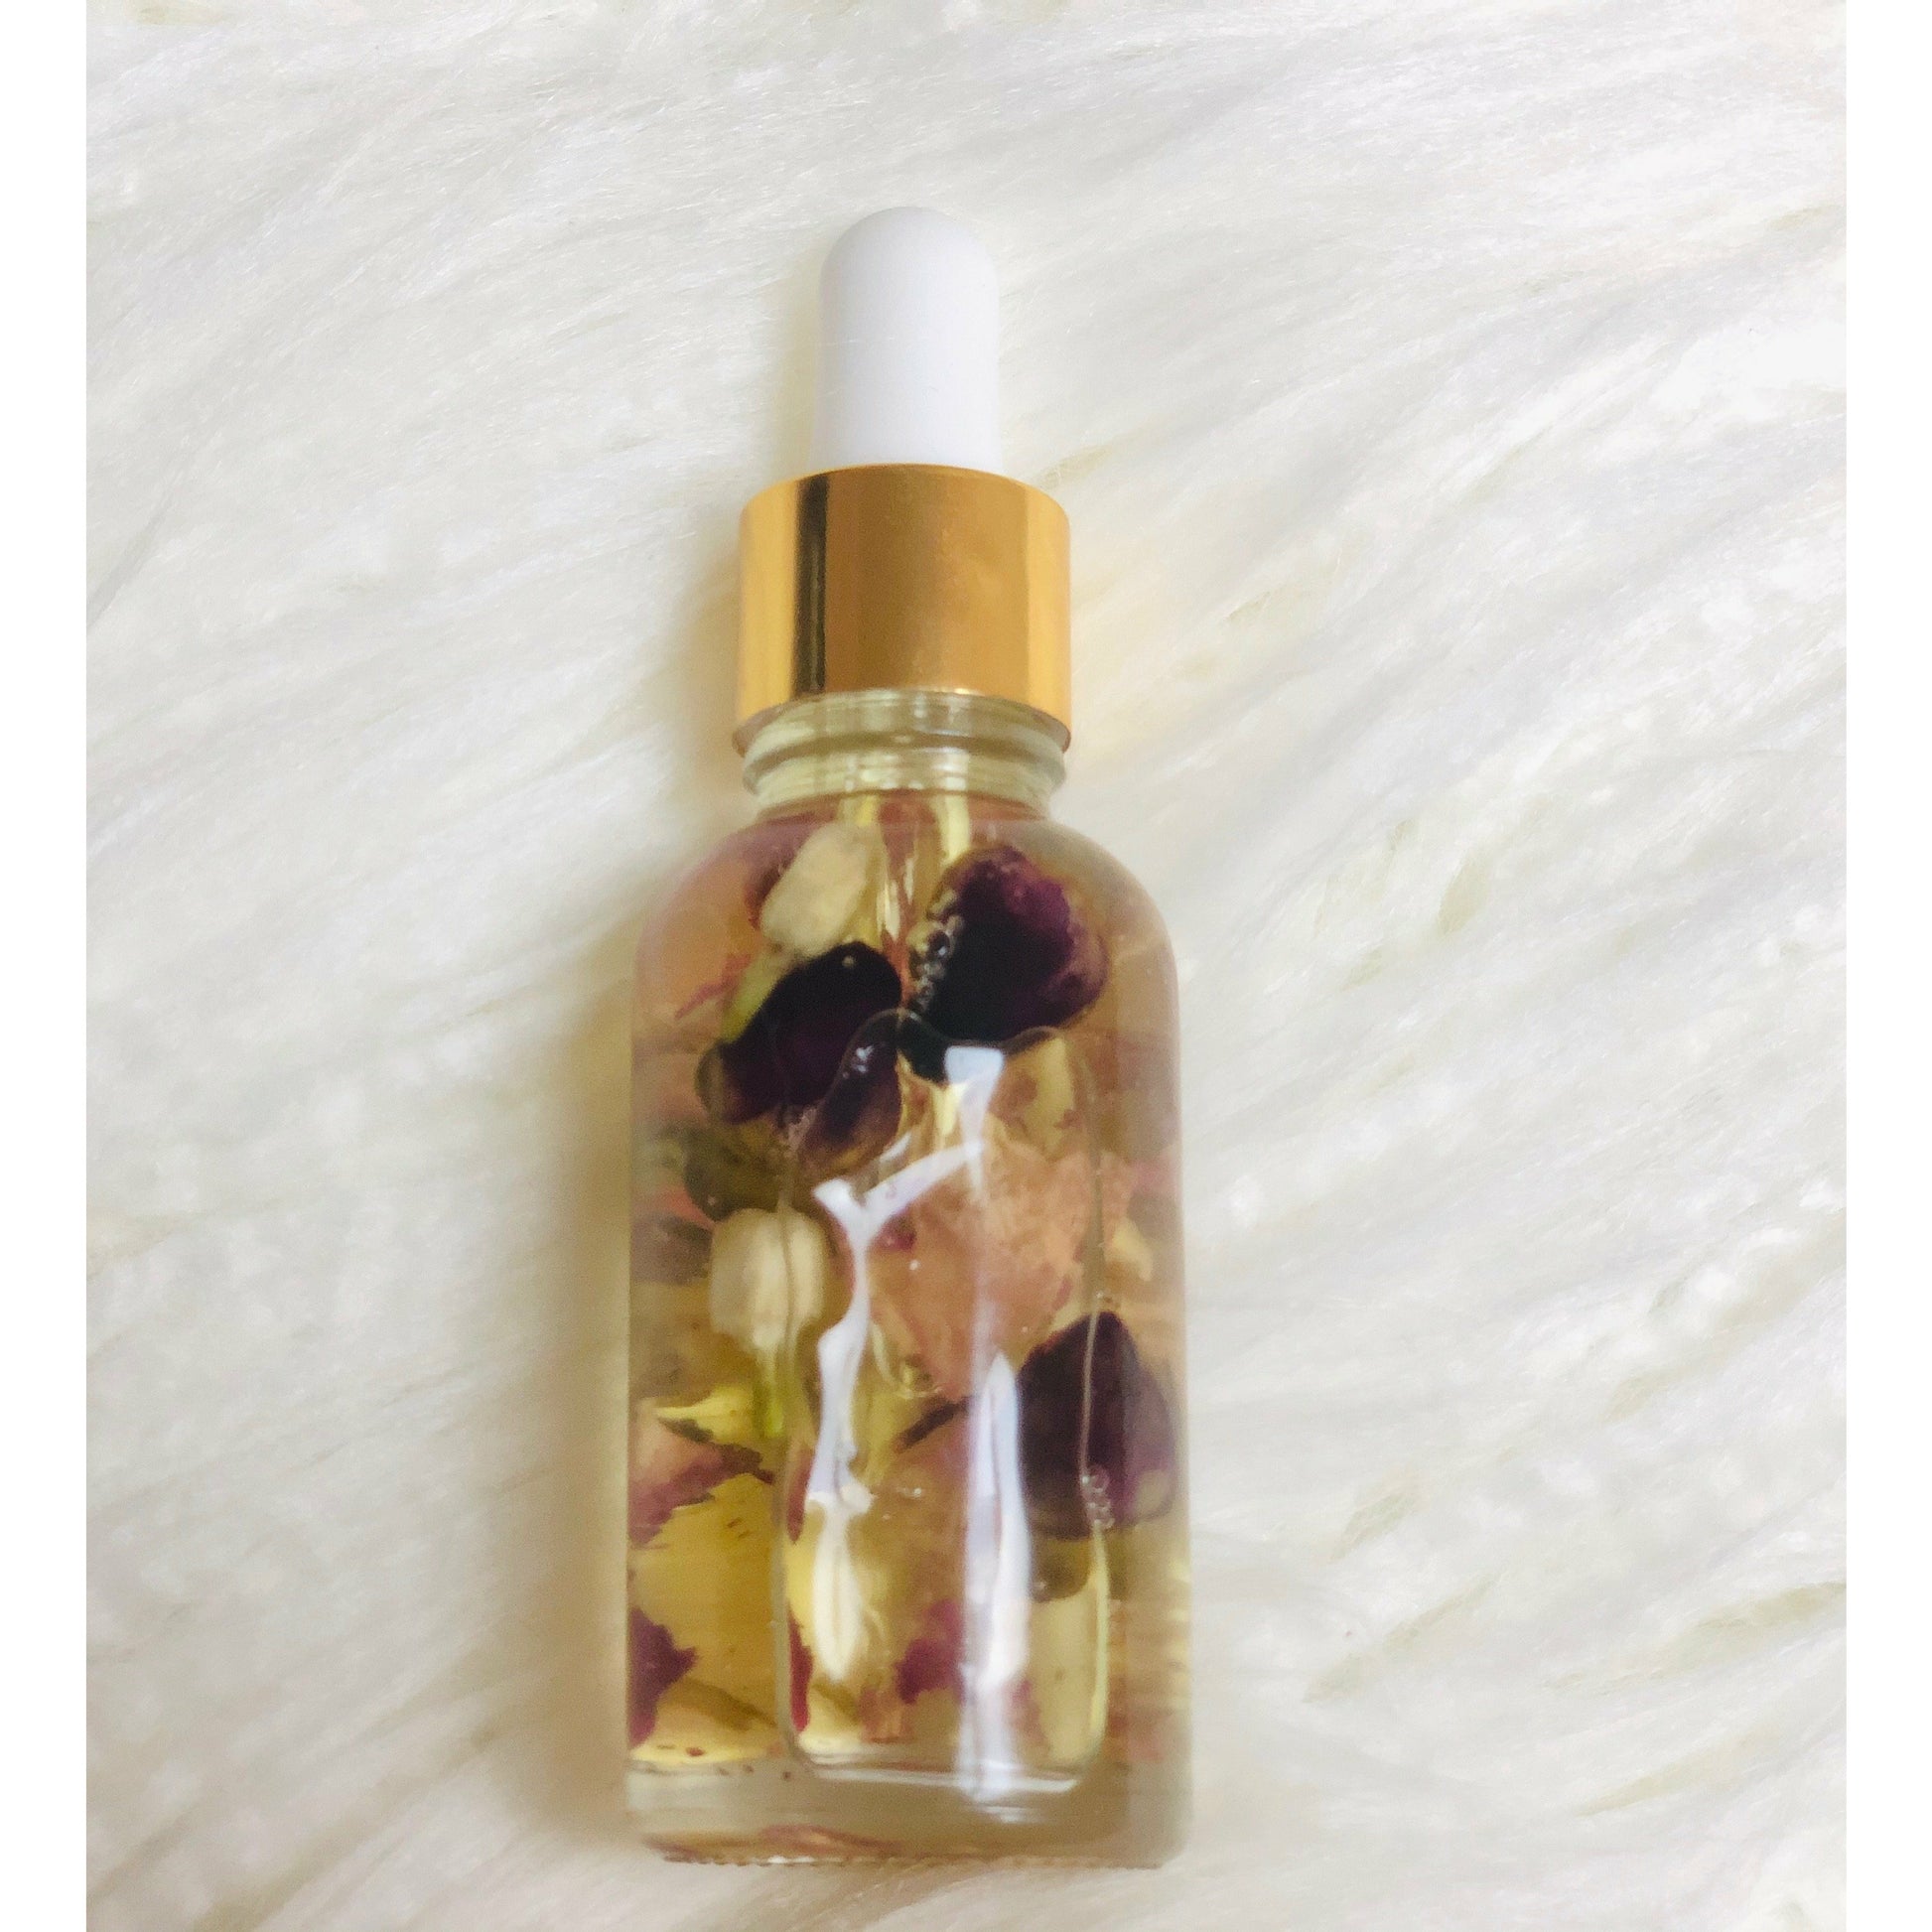 Love Spell Fragrance Oil by Eclectic Lady, 10 ml